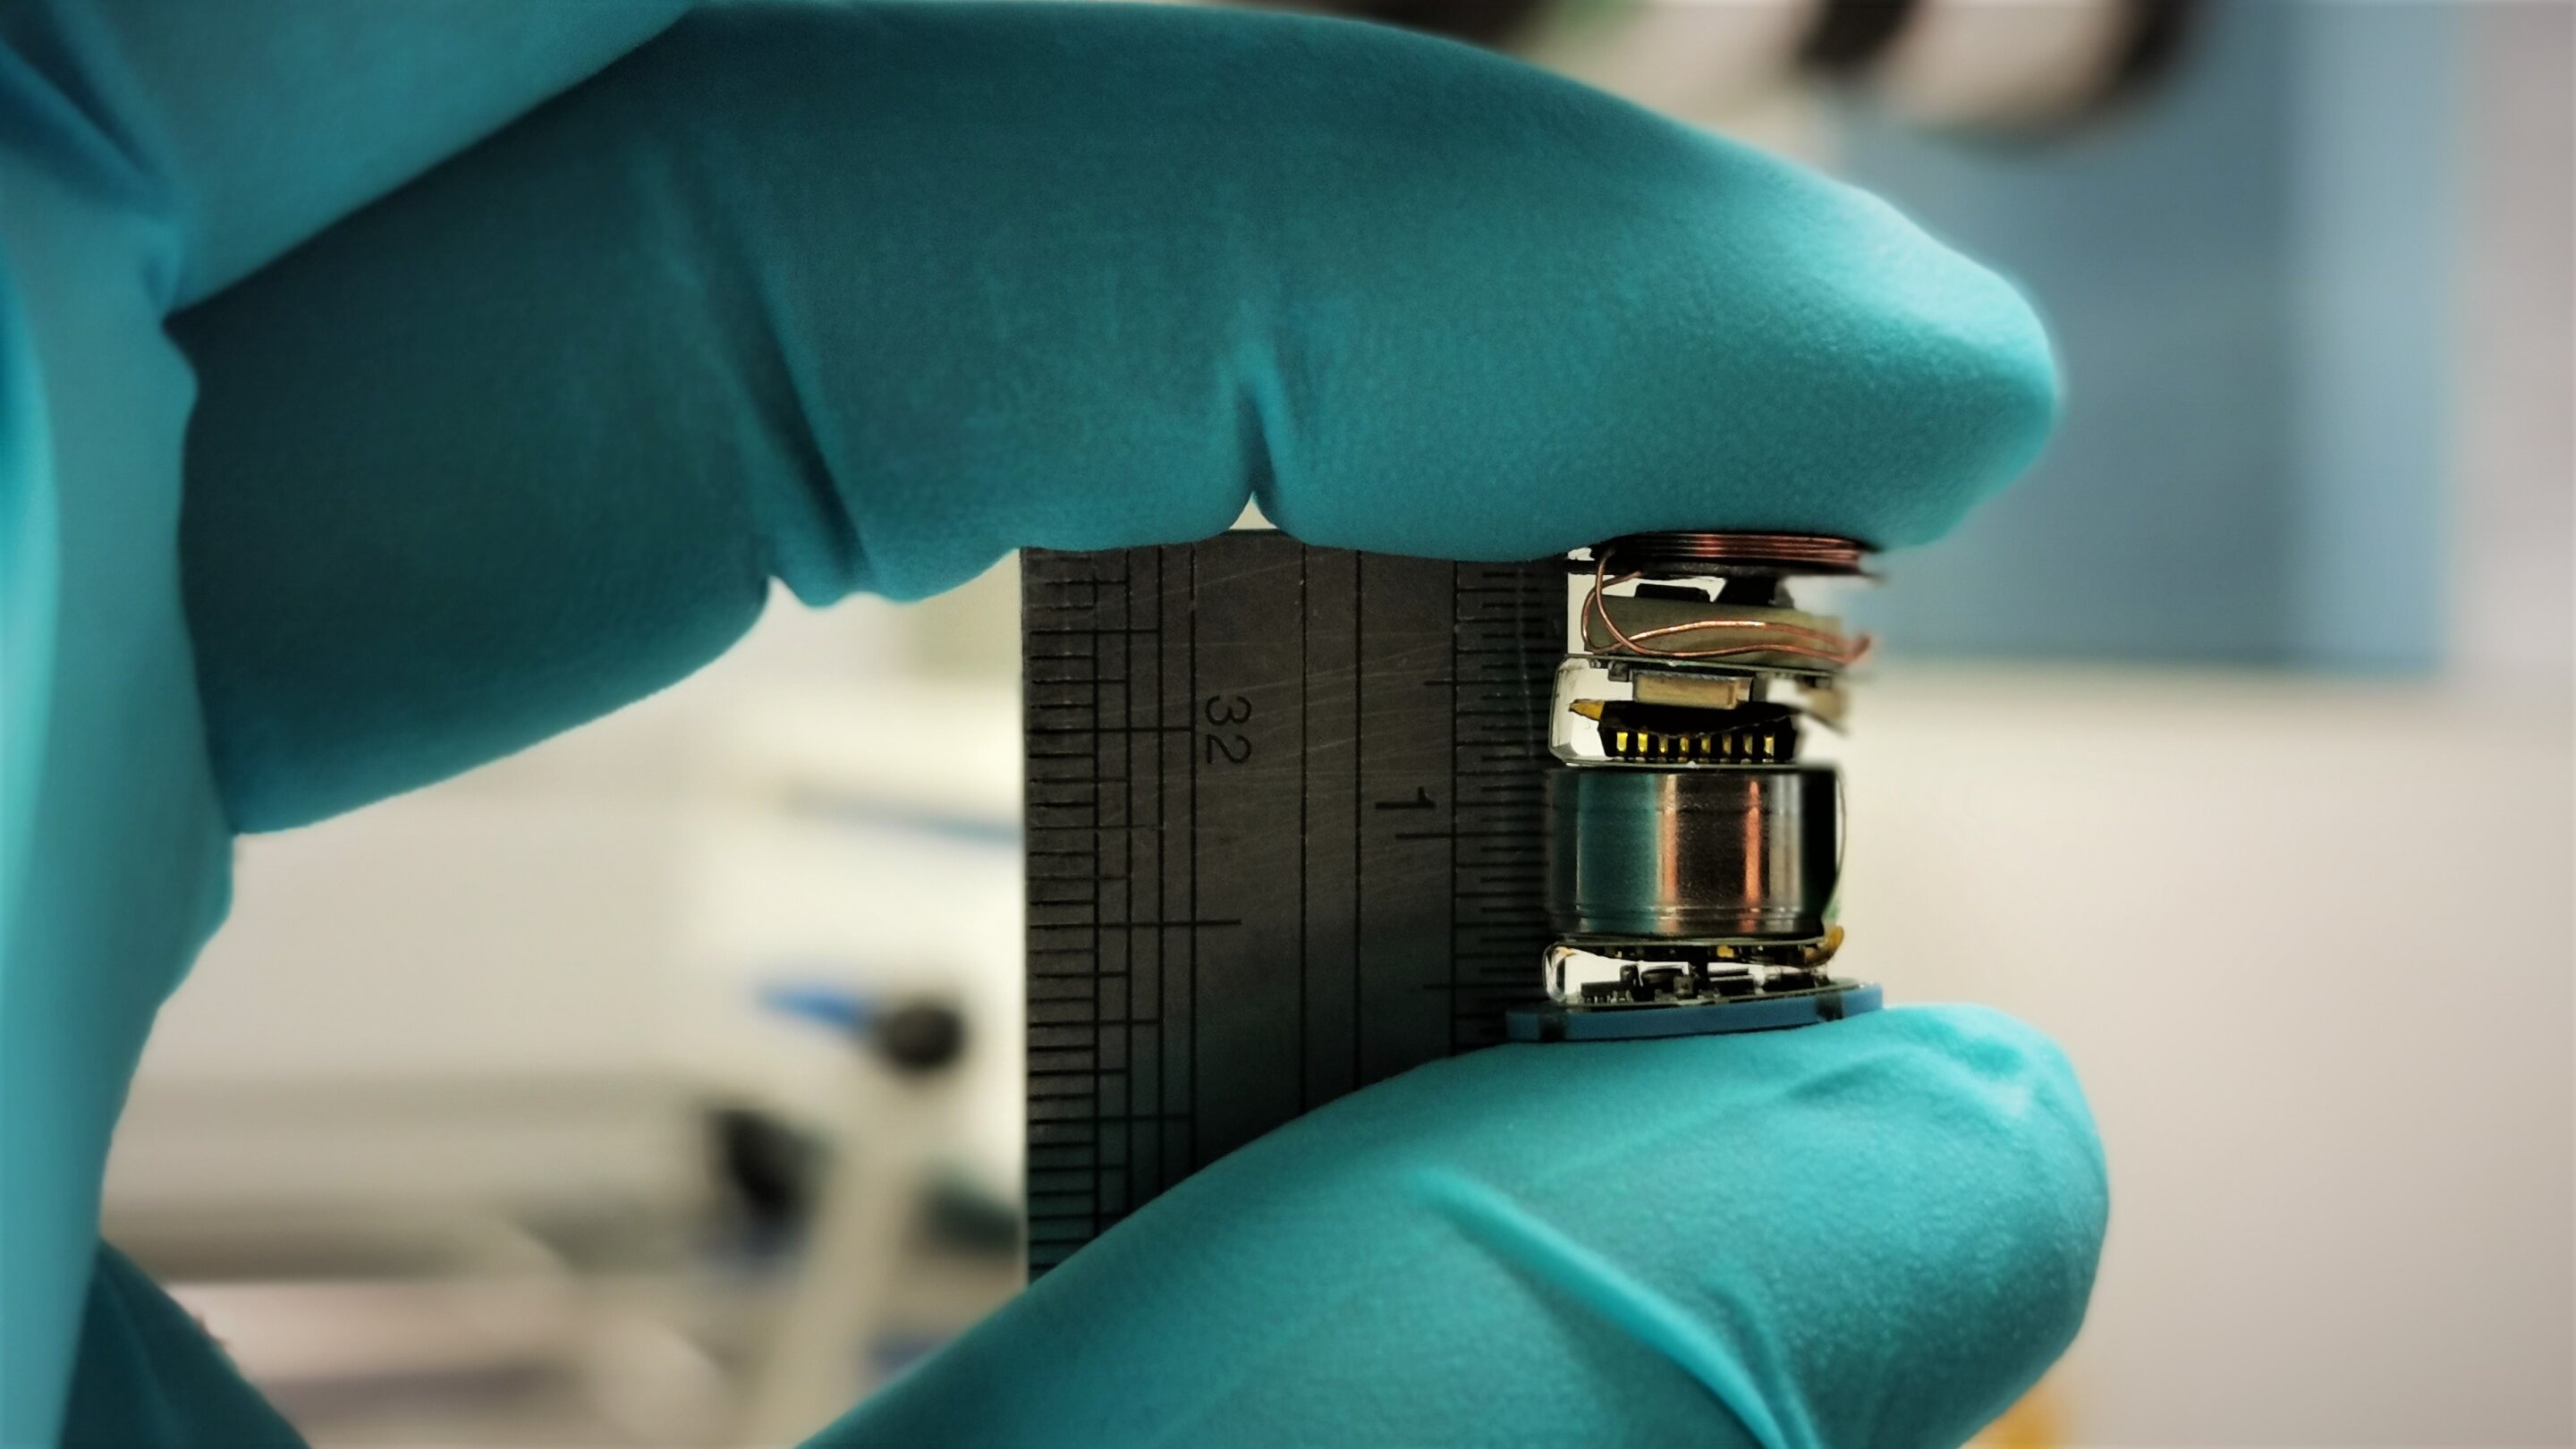 The world’s smallest impedance spectroscopy system in the form of a pill